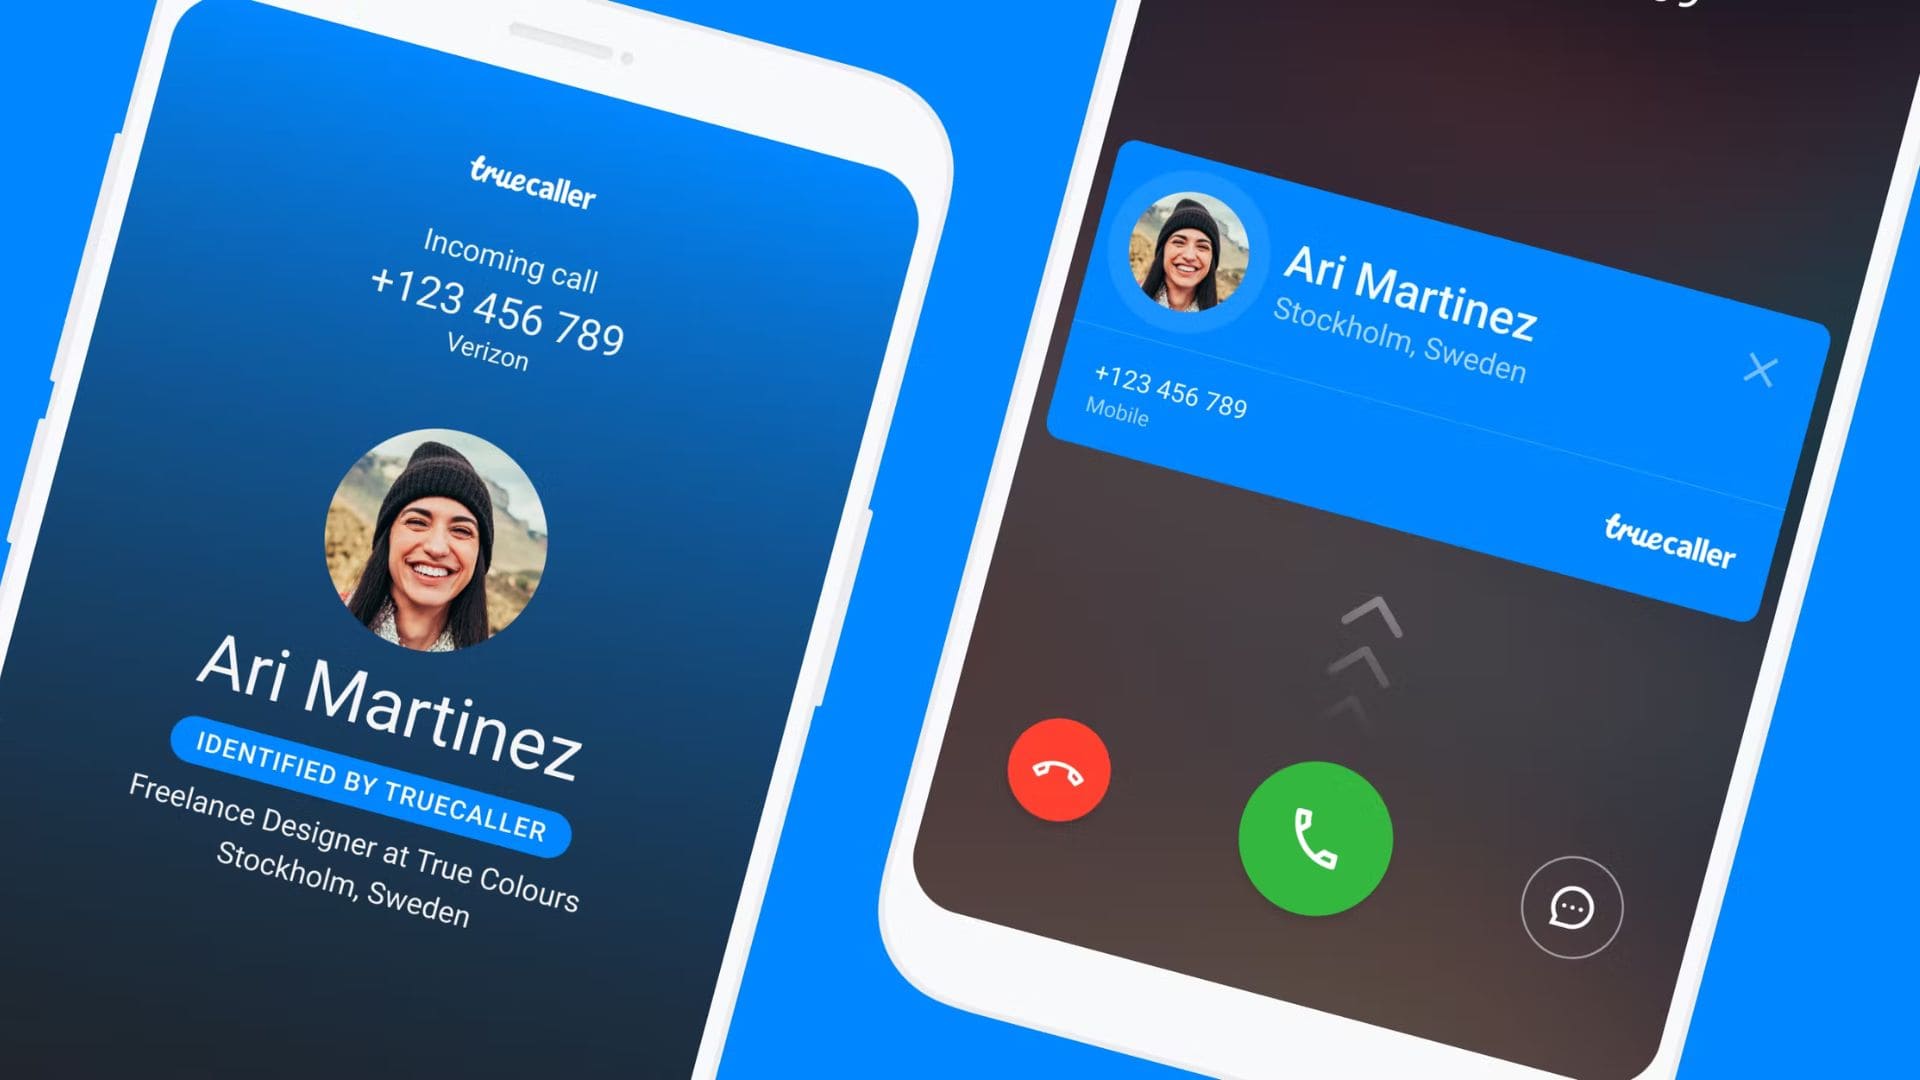 Truecaller Unveils Live Caller Id Feature For iOS Users, Learn To Access It